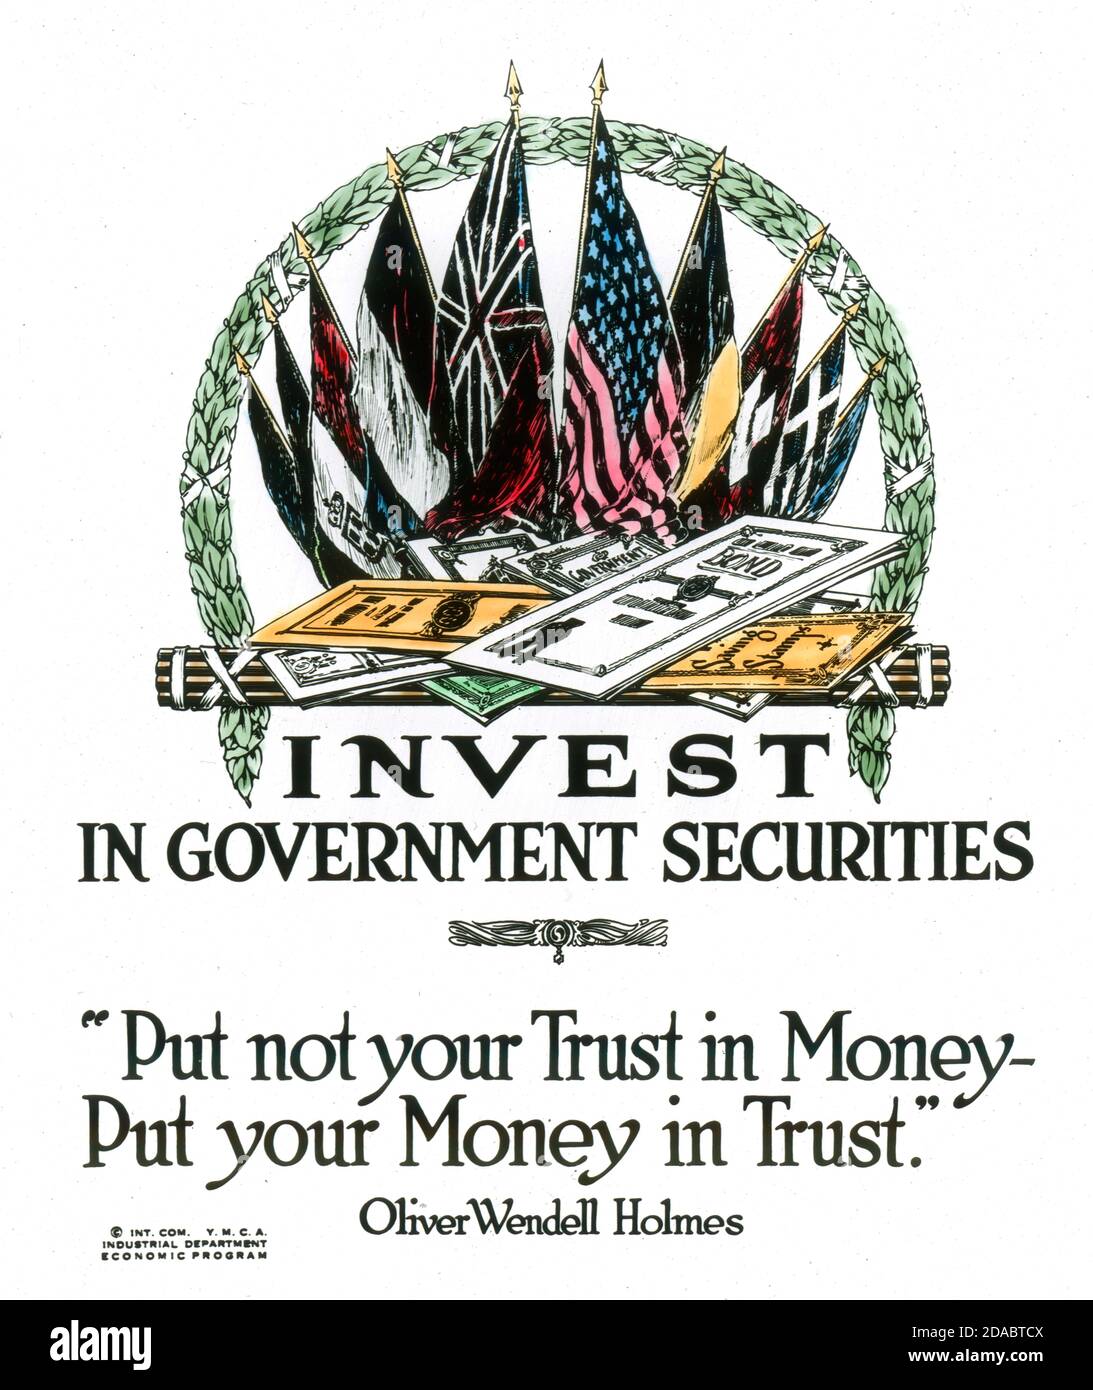 Poster from the YMCA “National Thrift Week” campaign in 1920, encouraging people to invest in government securities. SOURCE: GLASS SLIDE Stock Photo